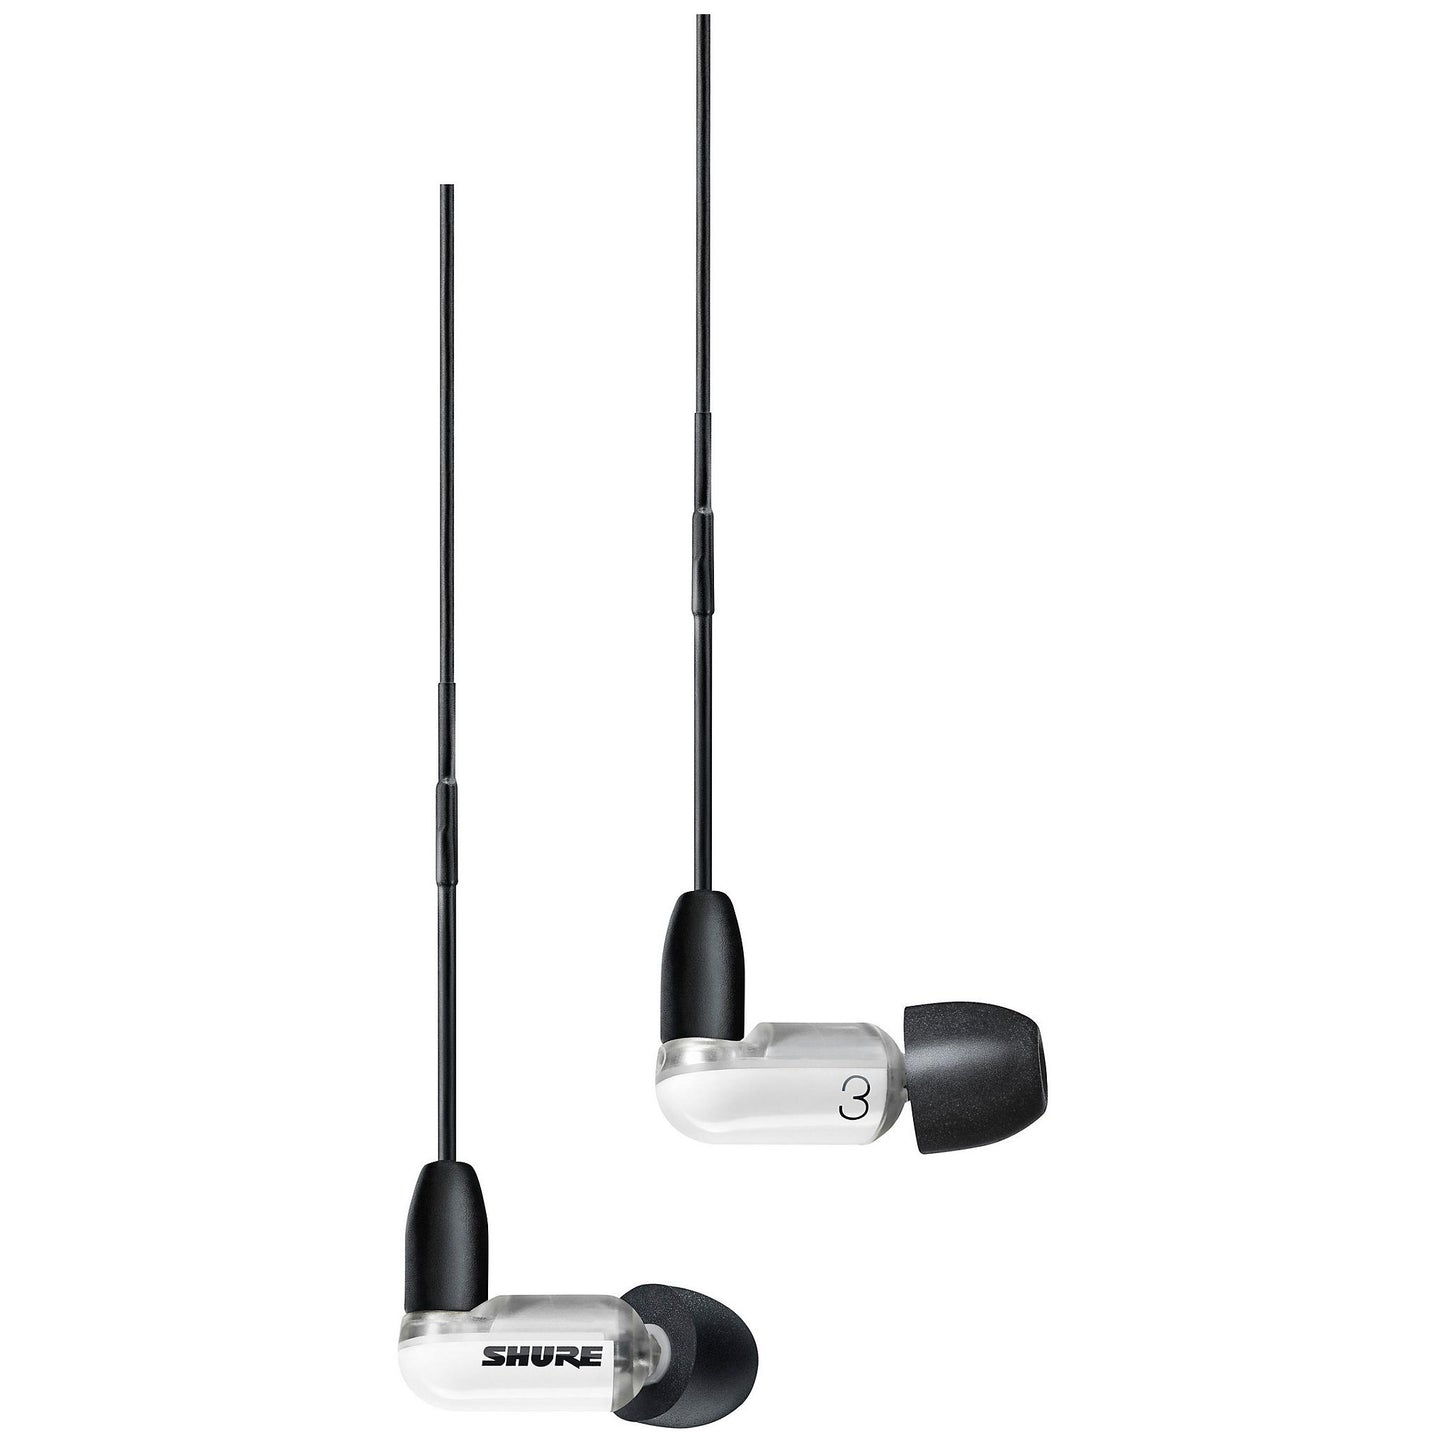 Shure AONIC 3 Sound Isolating Earphones, White